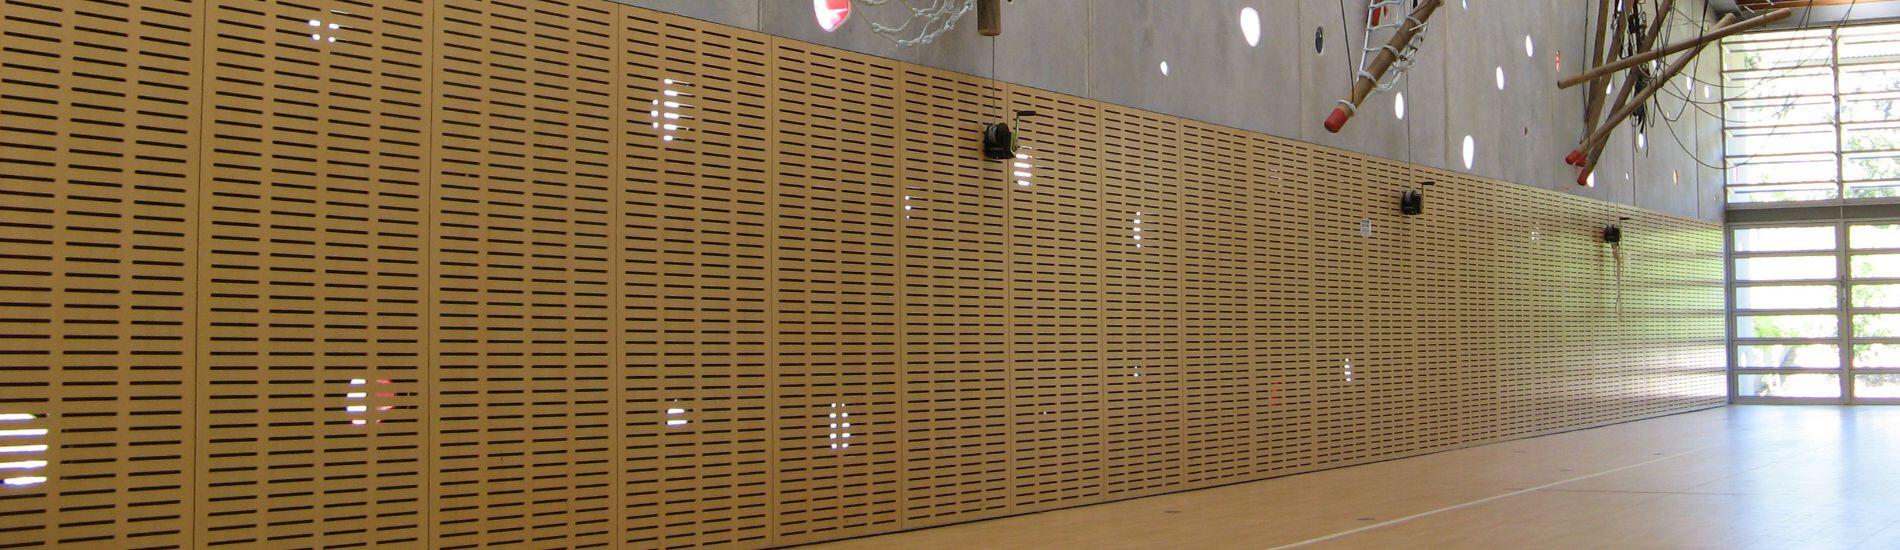 SUPACOUSTIC slotted wall panels provide durable noise reduction solution for sports hall